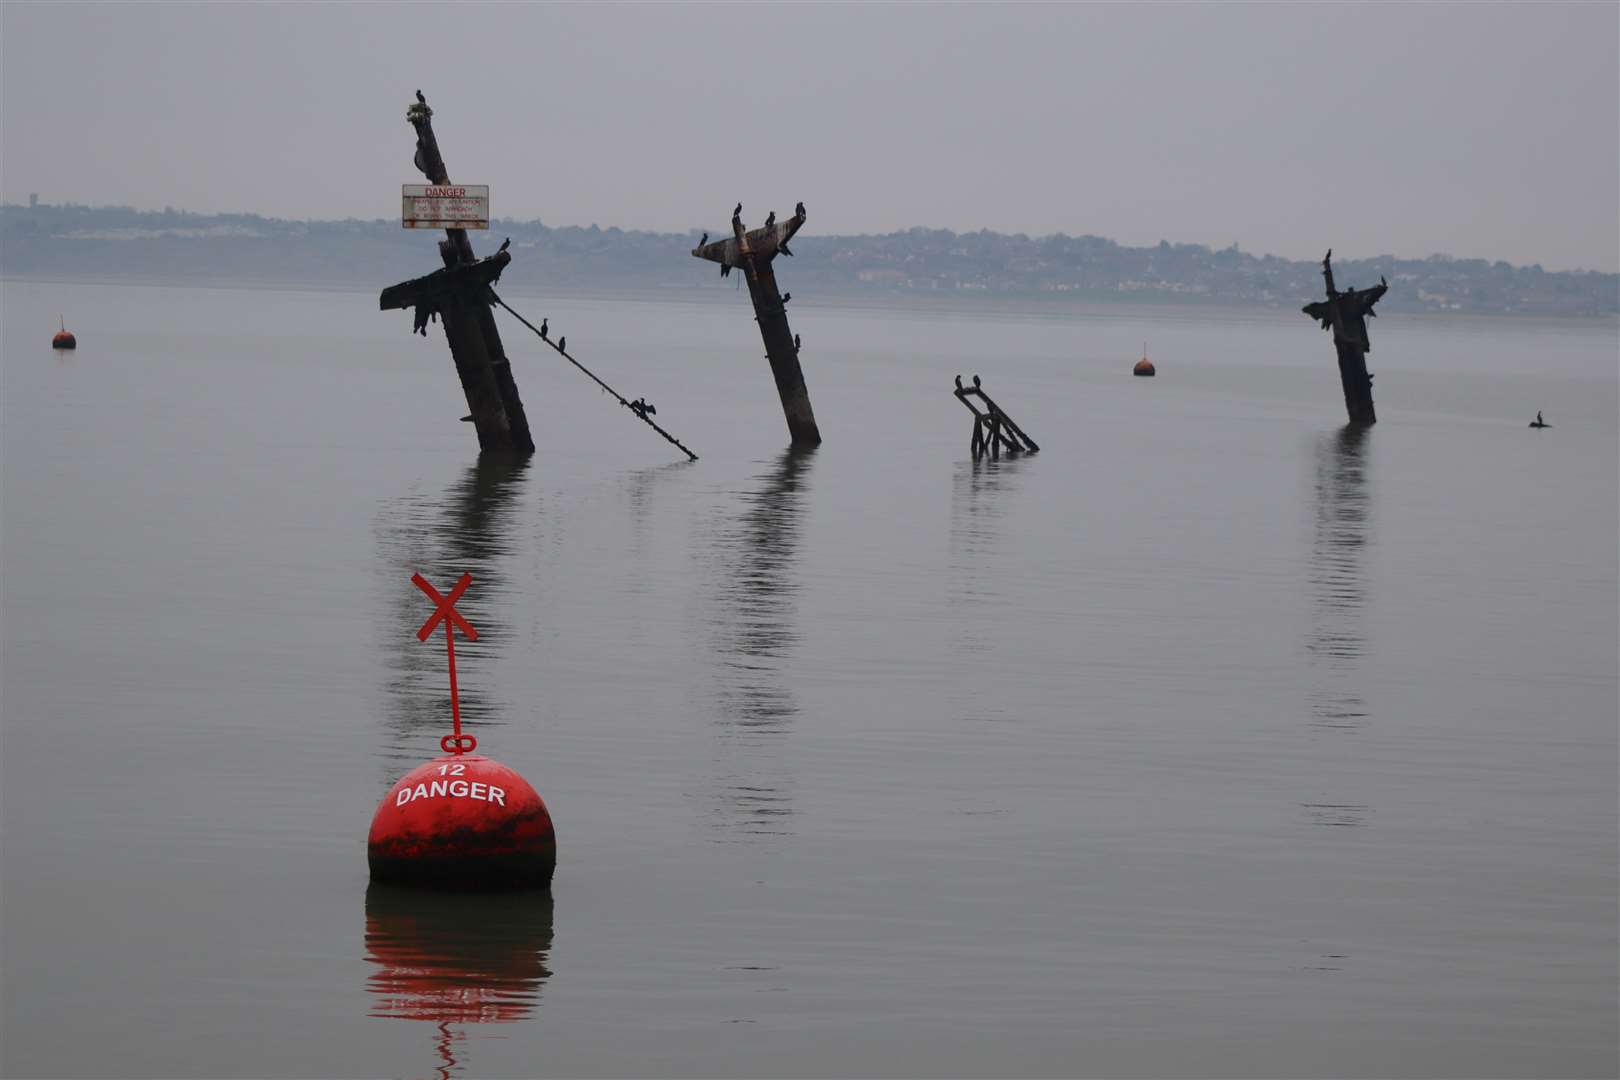 The exclusion zone is clearly marked by a ring of buoys